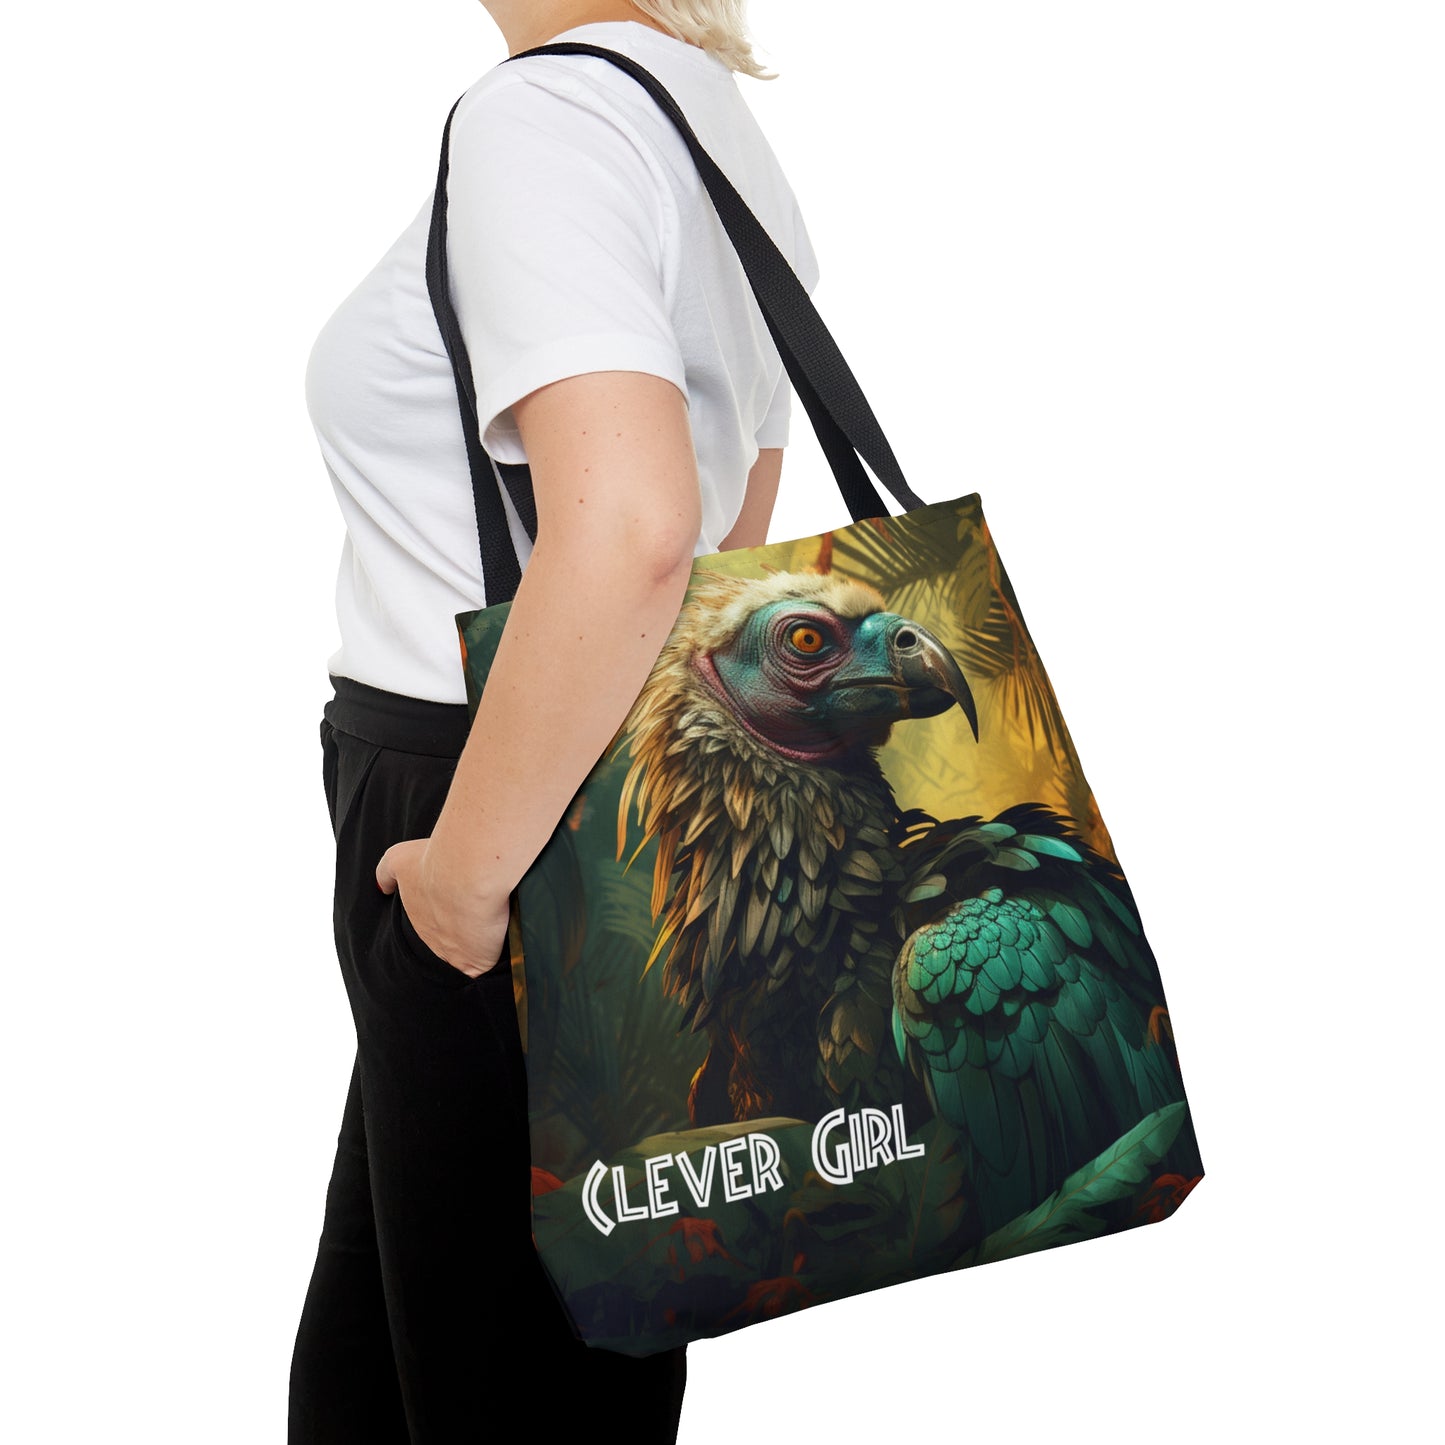 Tropical Vulture Tote Bag Clever Girl